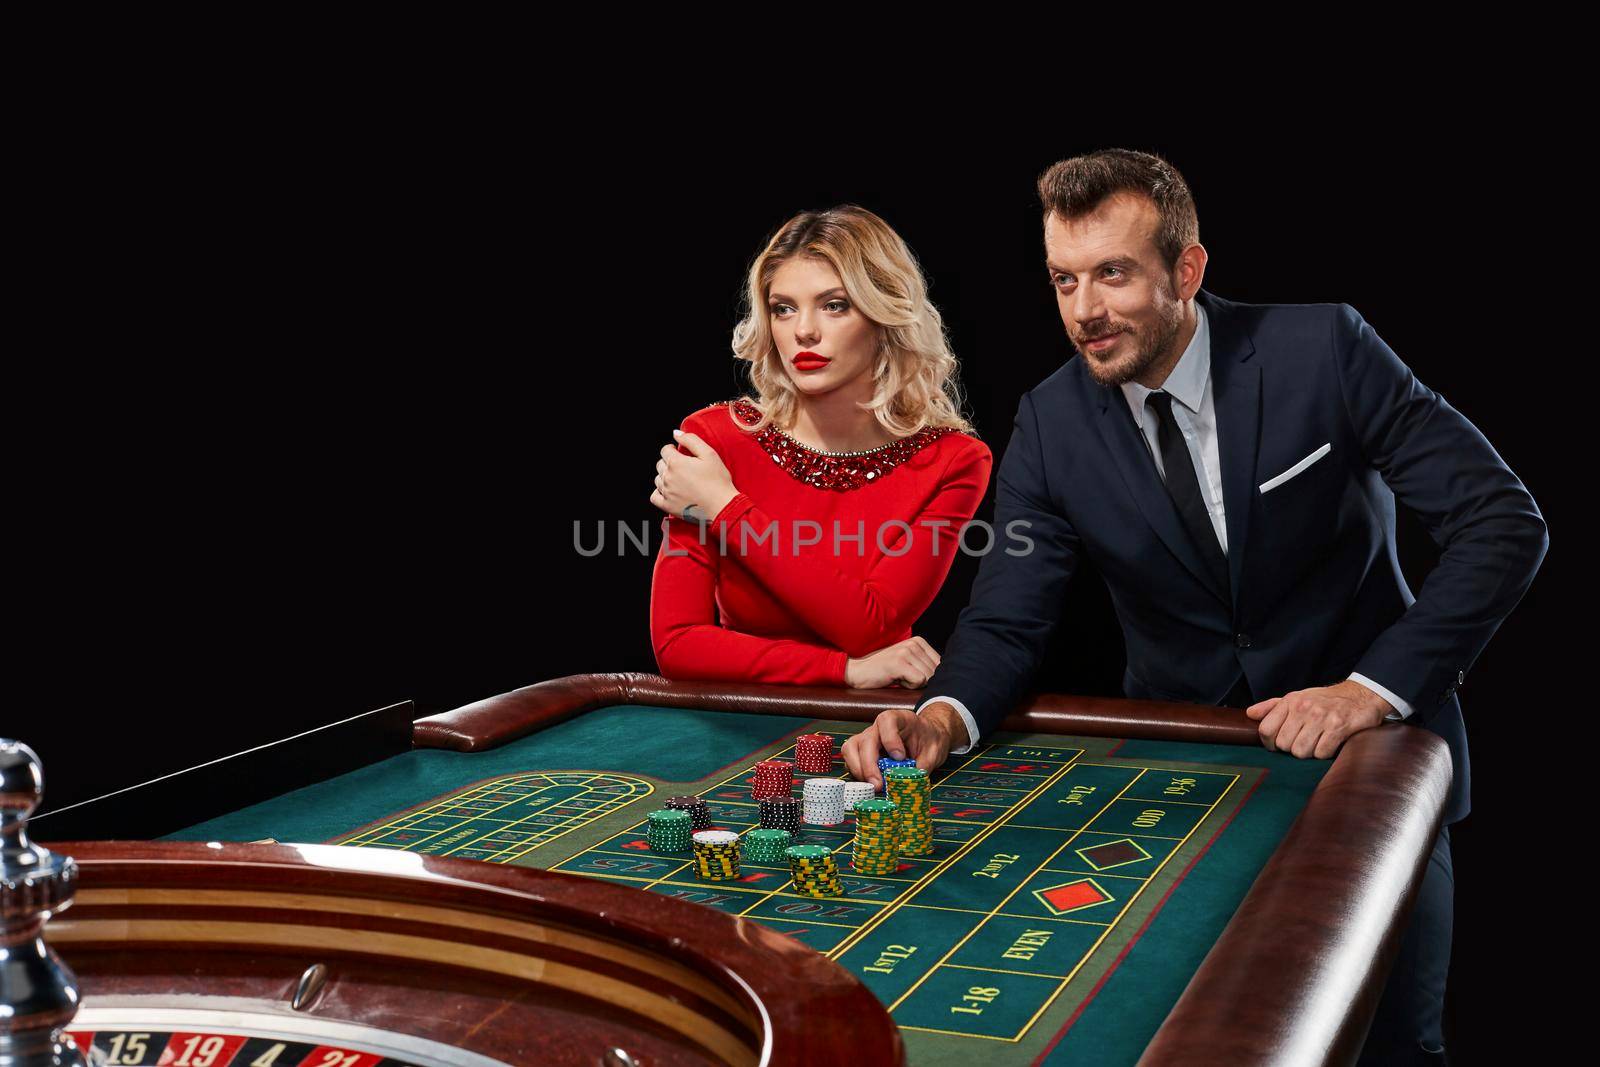 Couple playing roulette wins at the casino. Addiction to the gambling. he bets chips